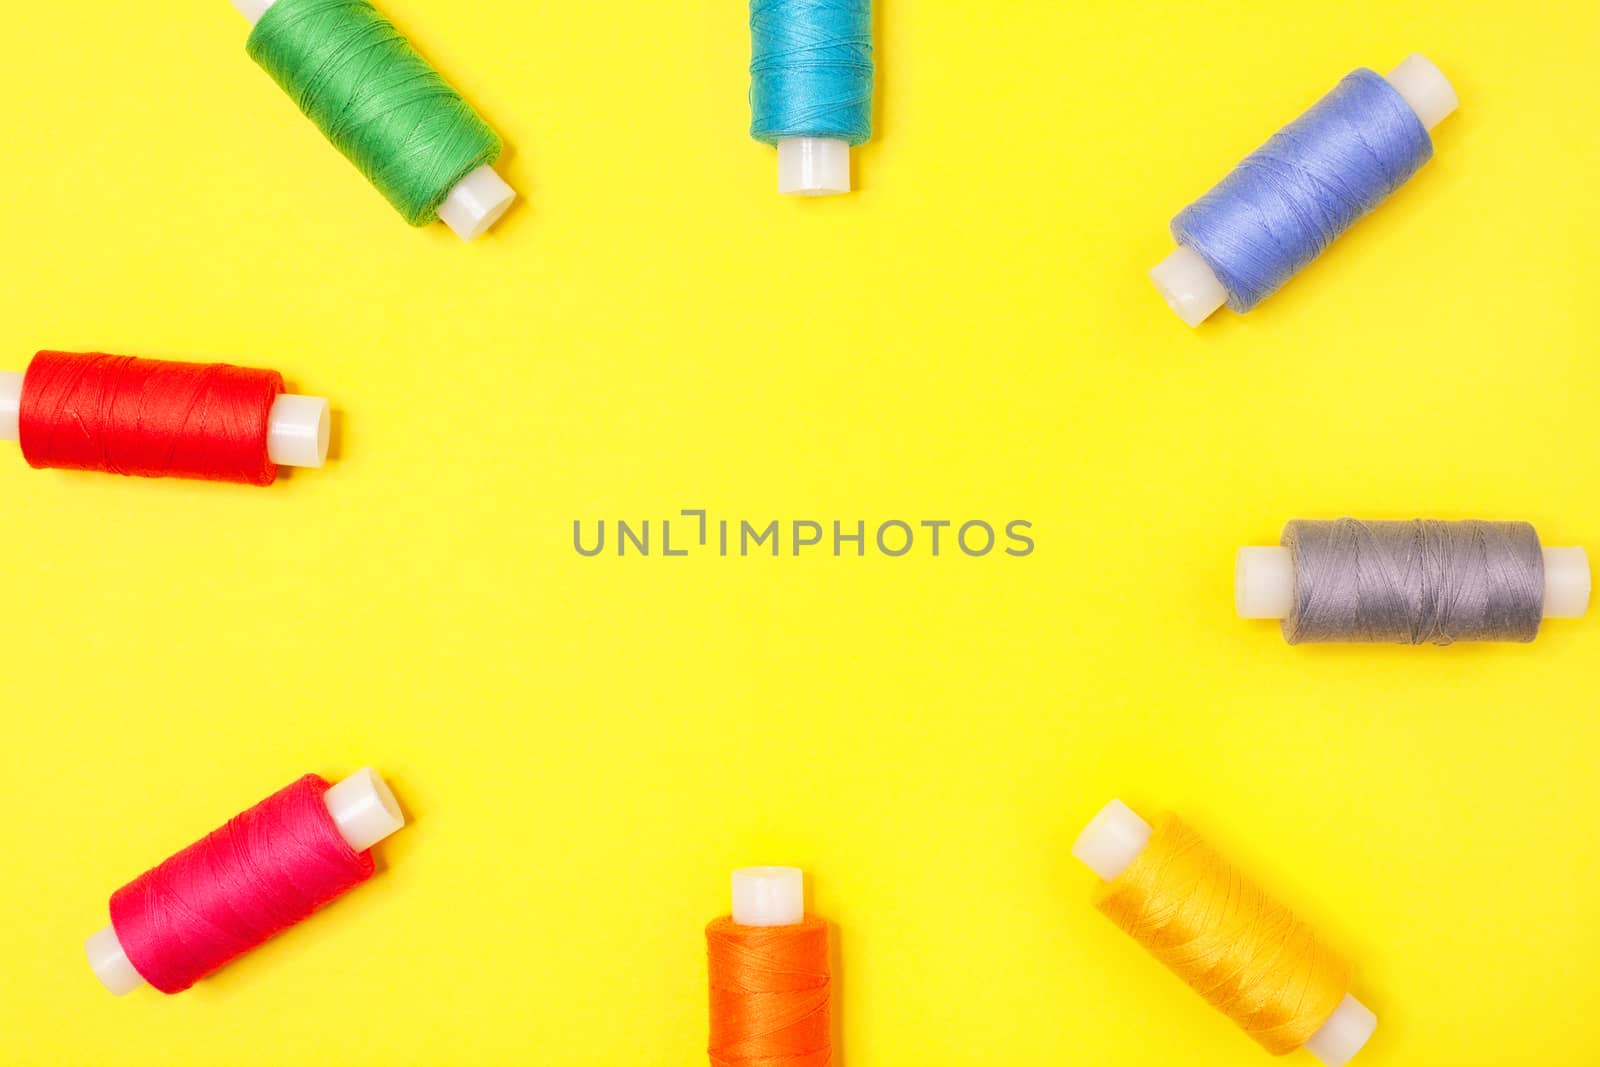 Handicraft background. Set of multicolored spools of thread form frame on yellow background with copy space. Accessories for needlework, embroidery, sewing. Flat lay. Top view